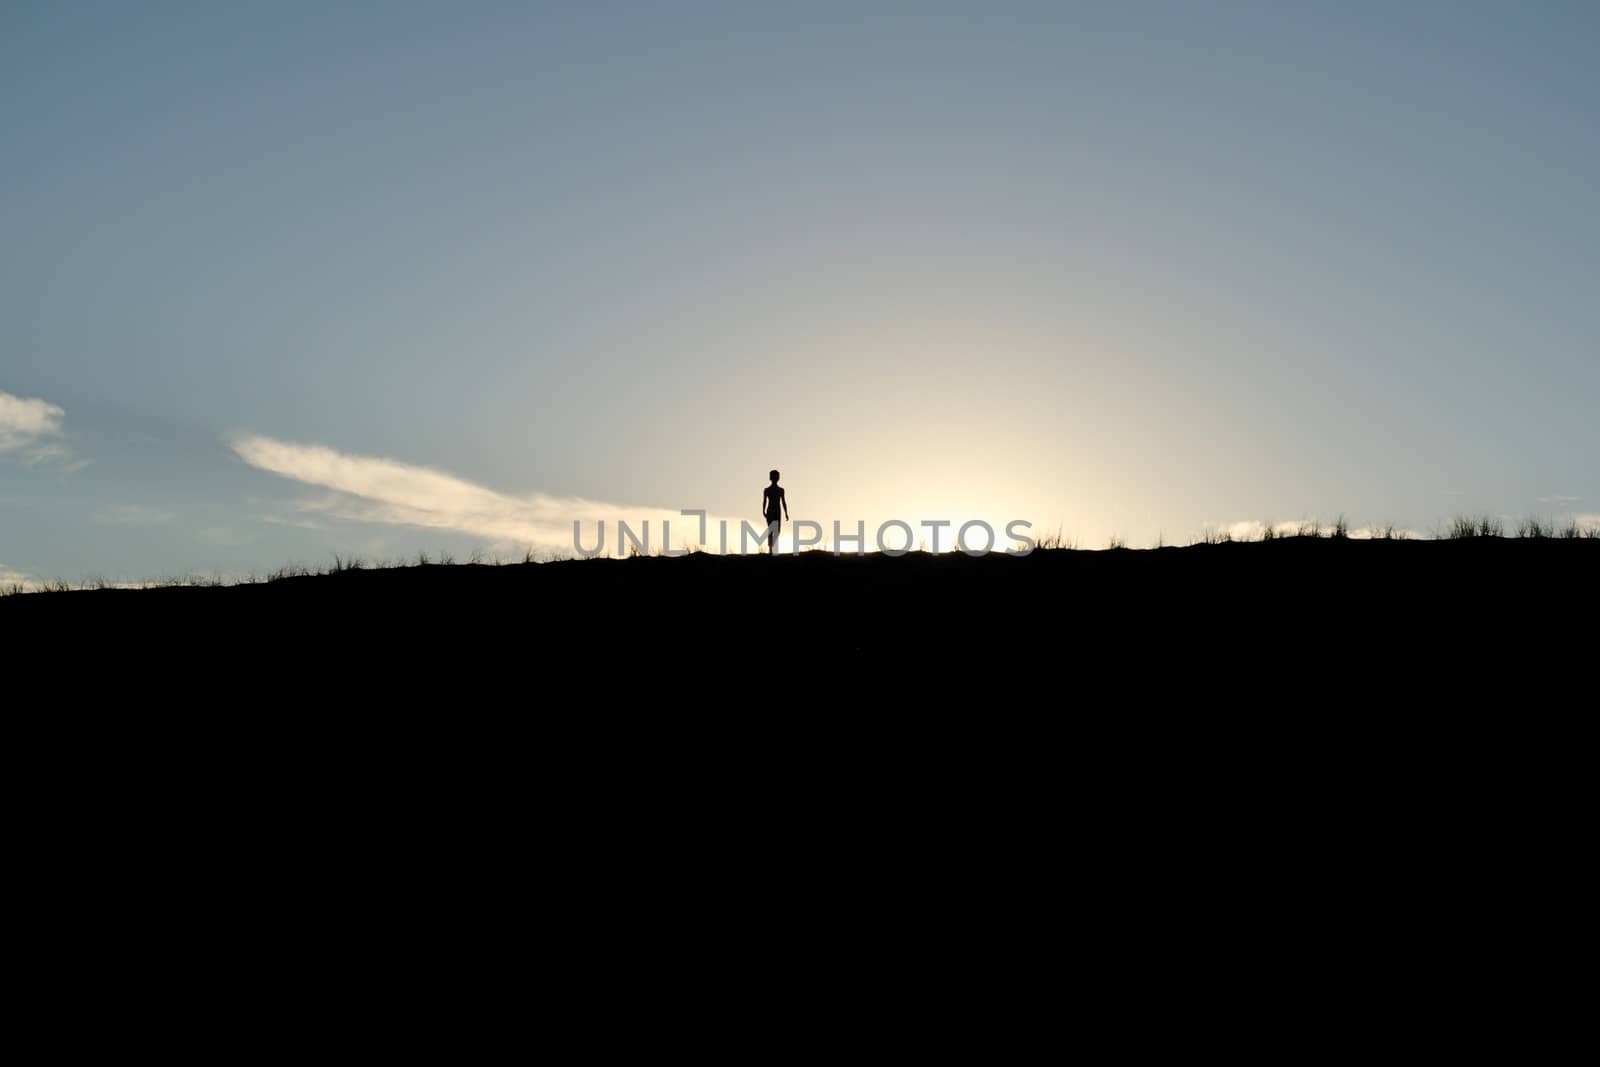 Young boy silhouetted against the sun atop a dune in the desert